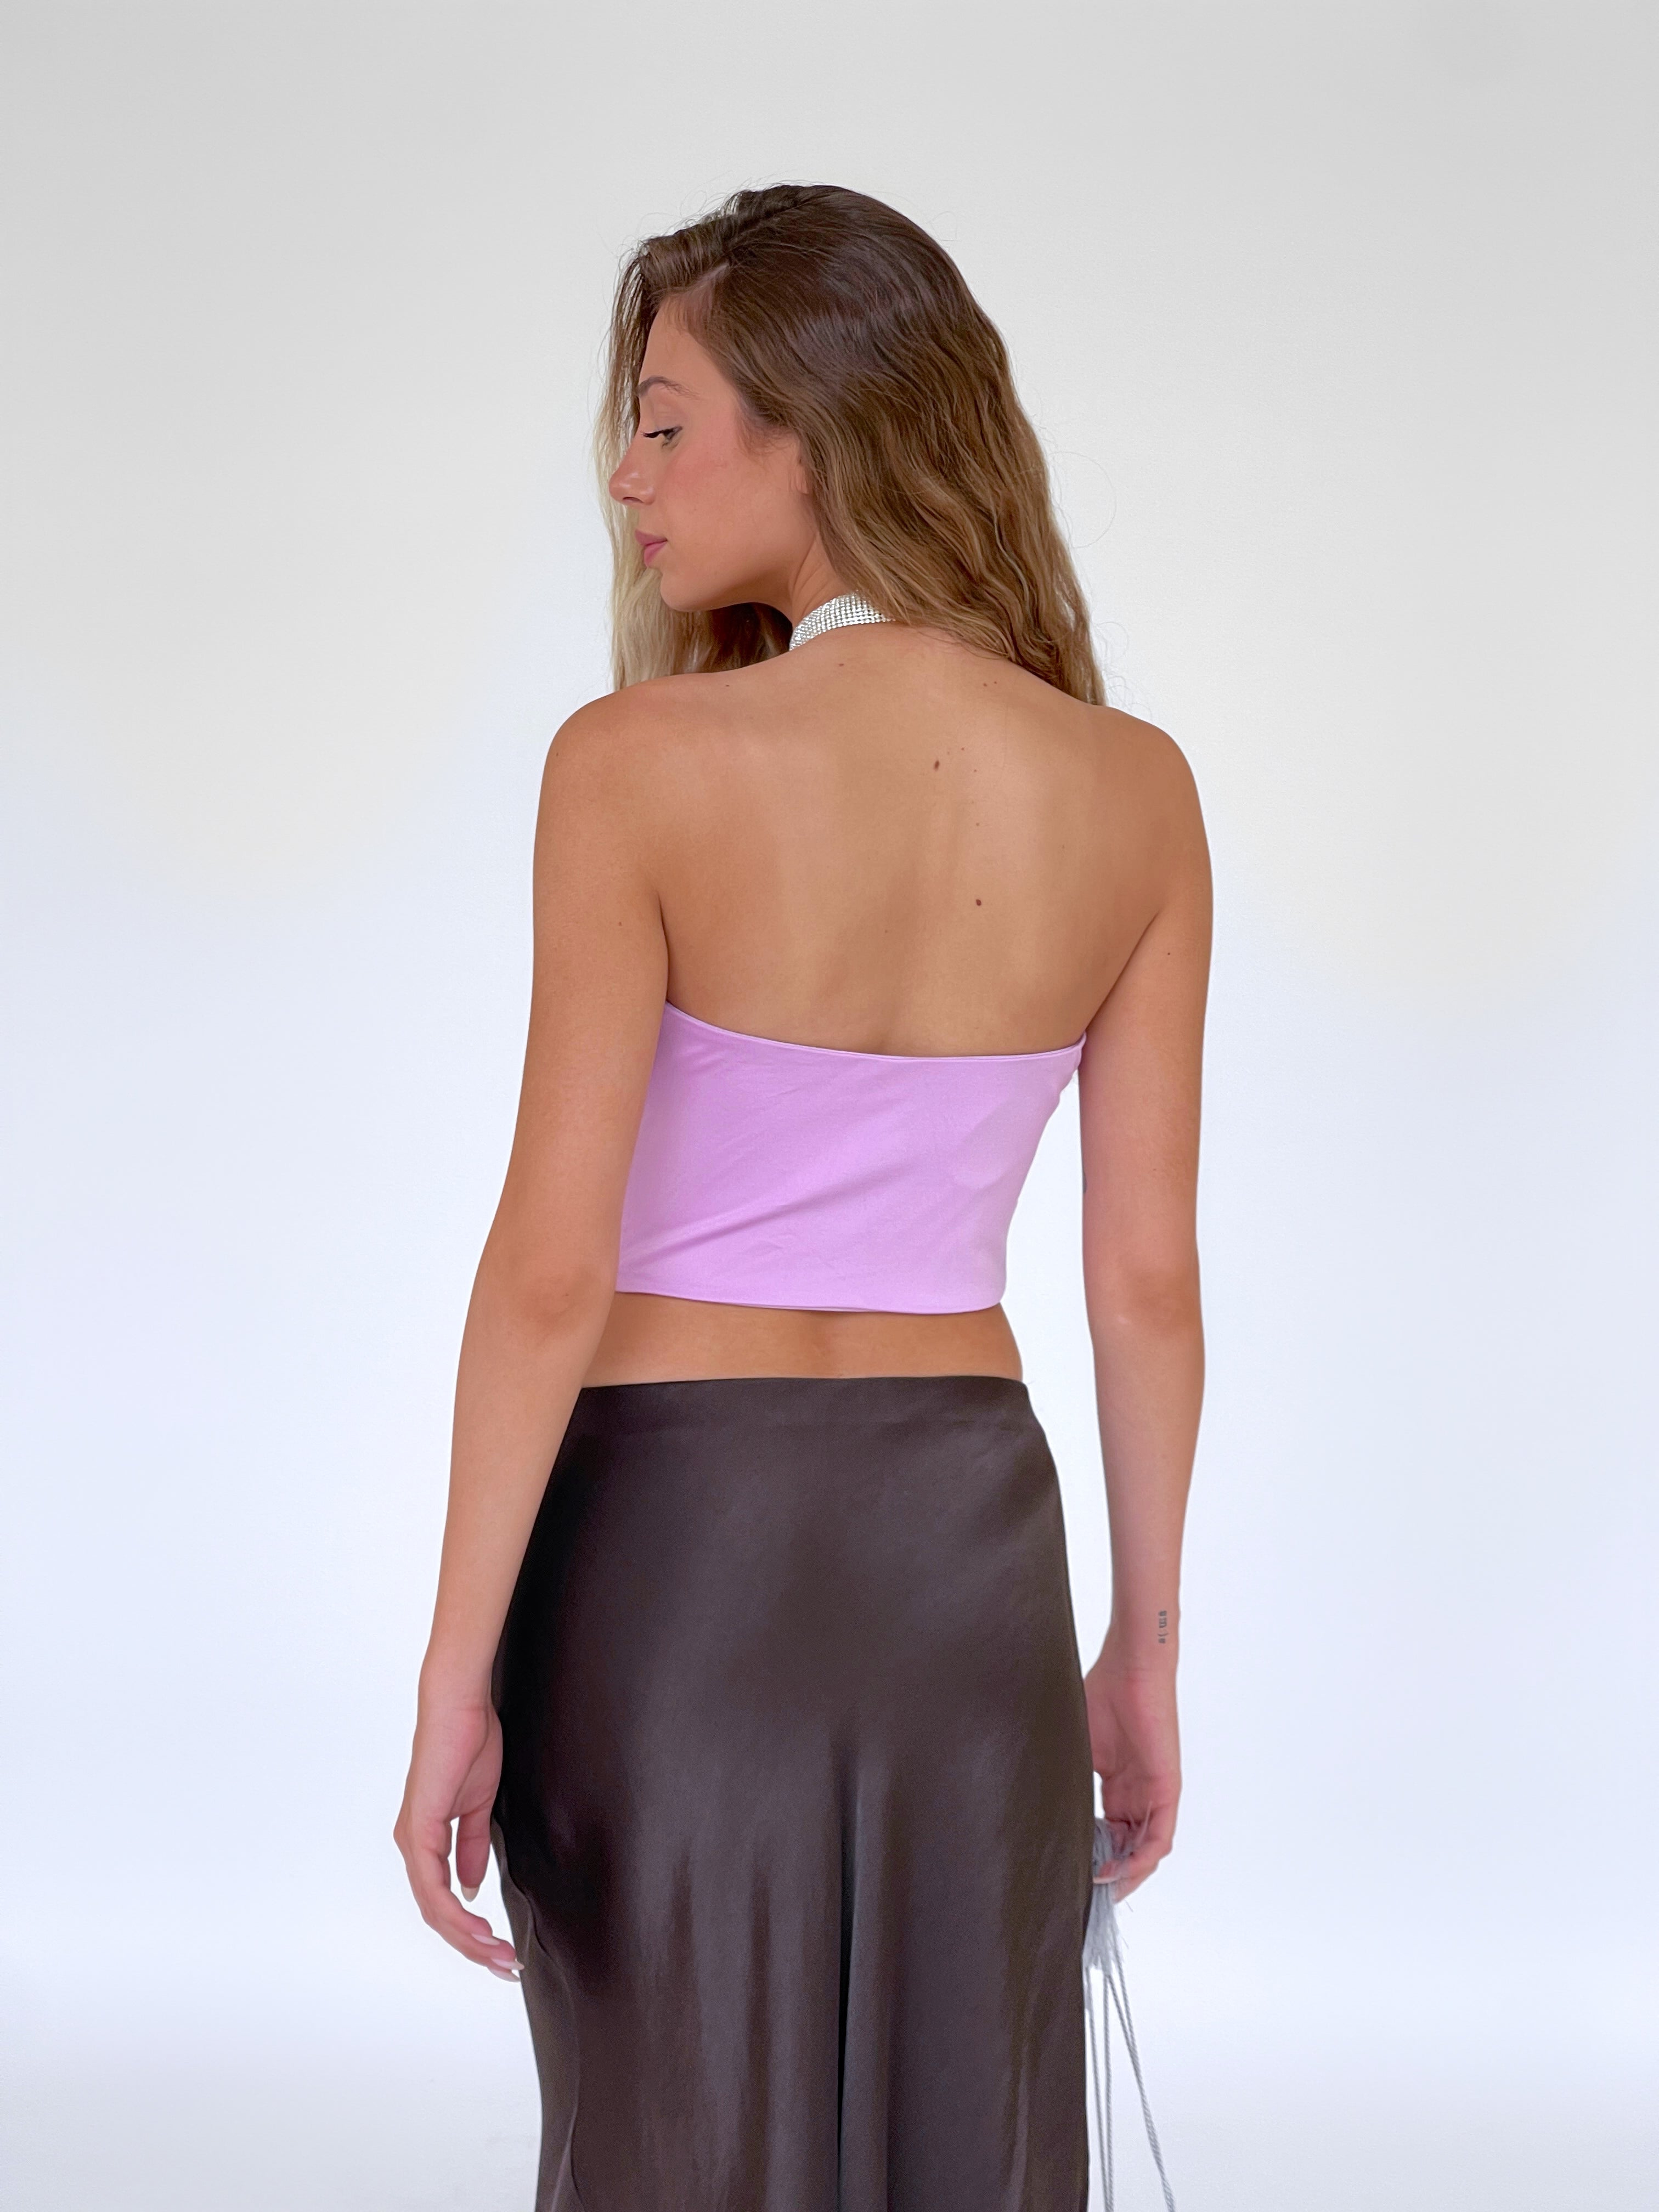 CORSET TOP IN LILAC